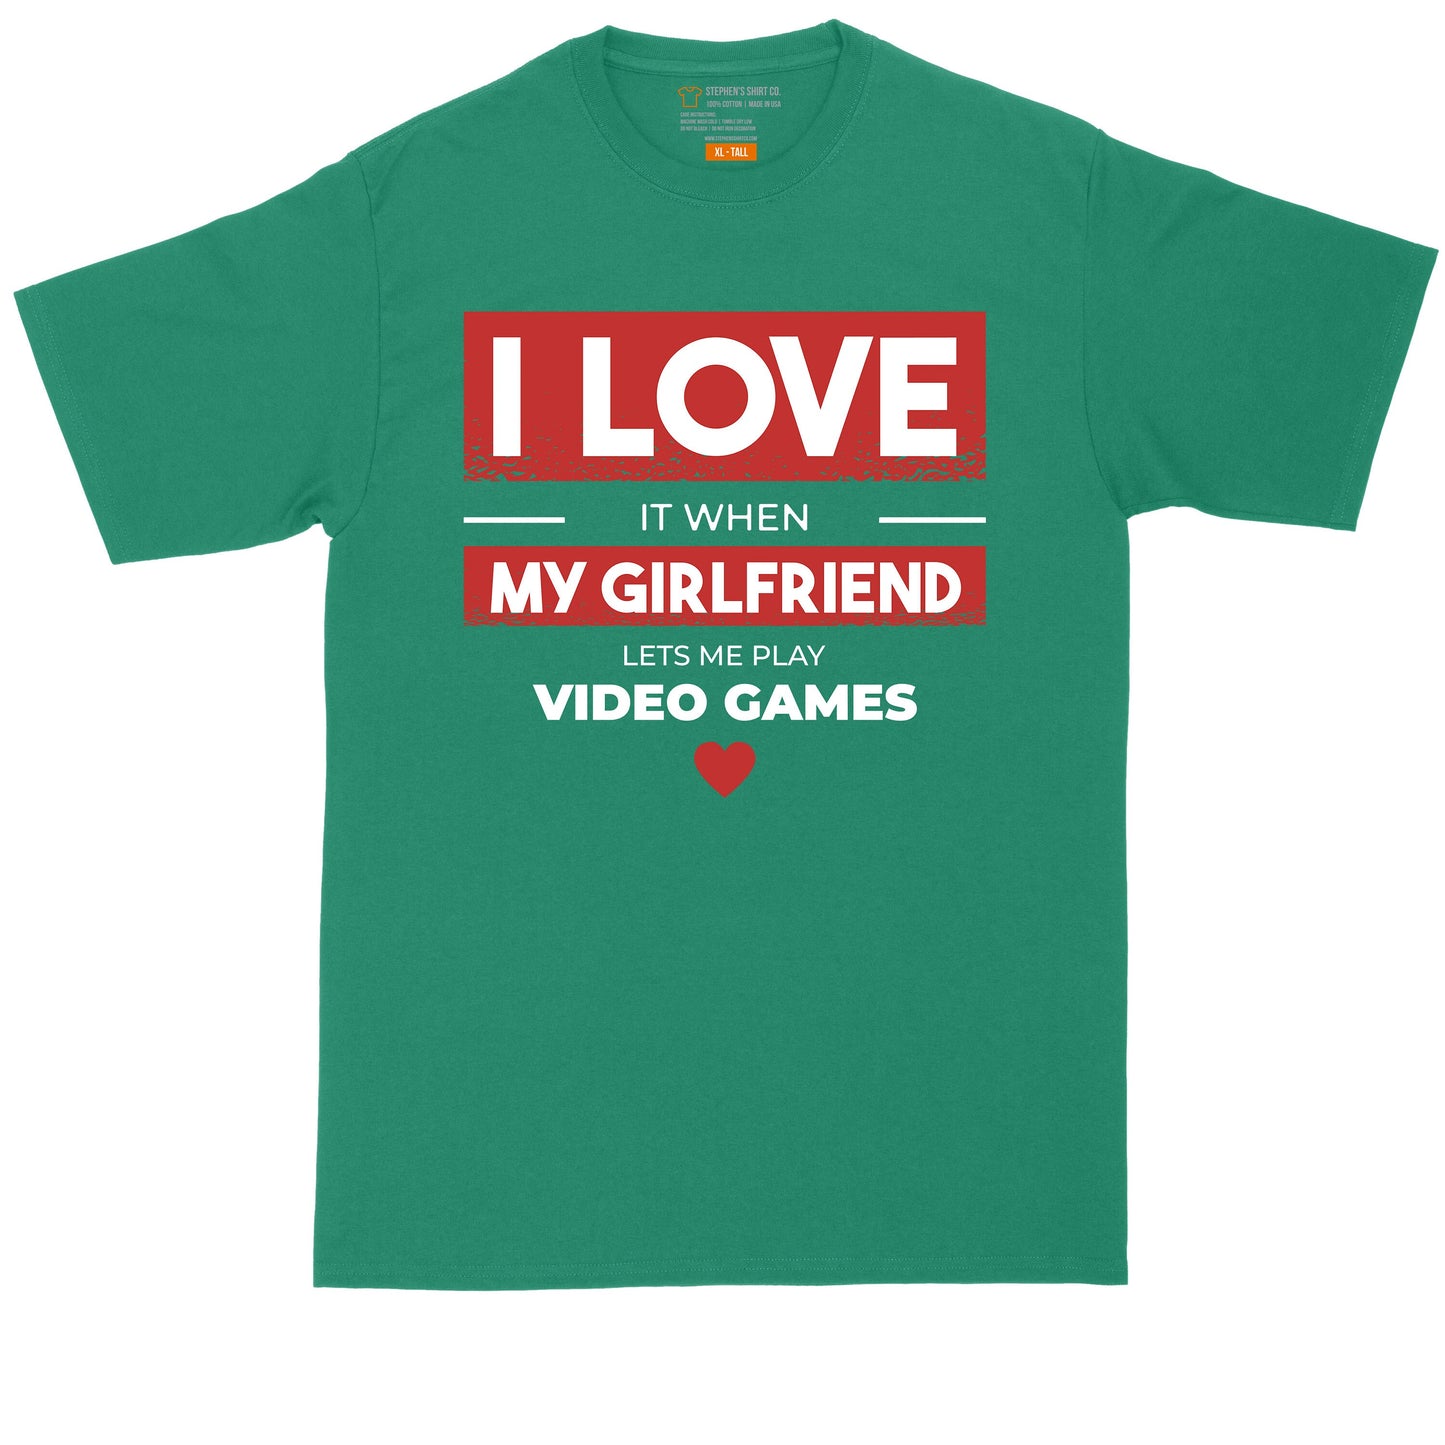 I Love it When My Girlfriend Lets Me Play Video Games | Big and Tall Men | Funny Shirt | Video Game Lover | Big Guy Shirt